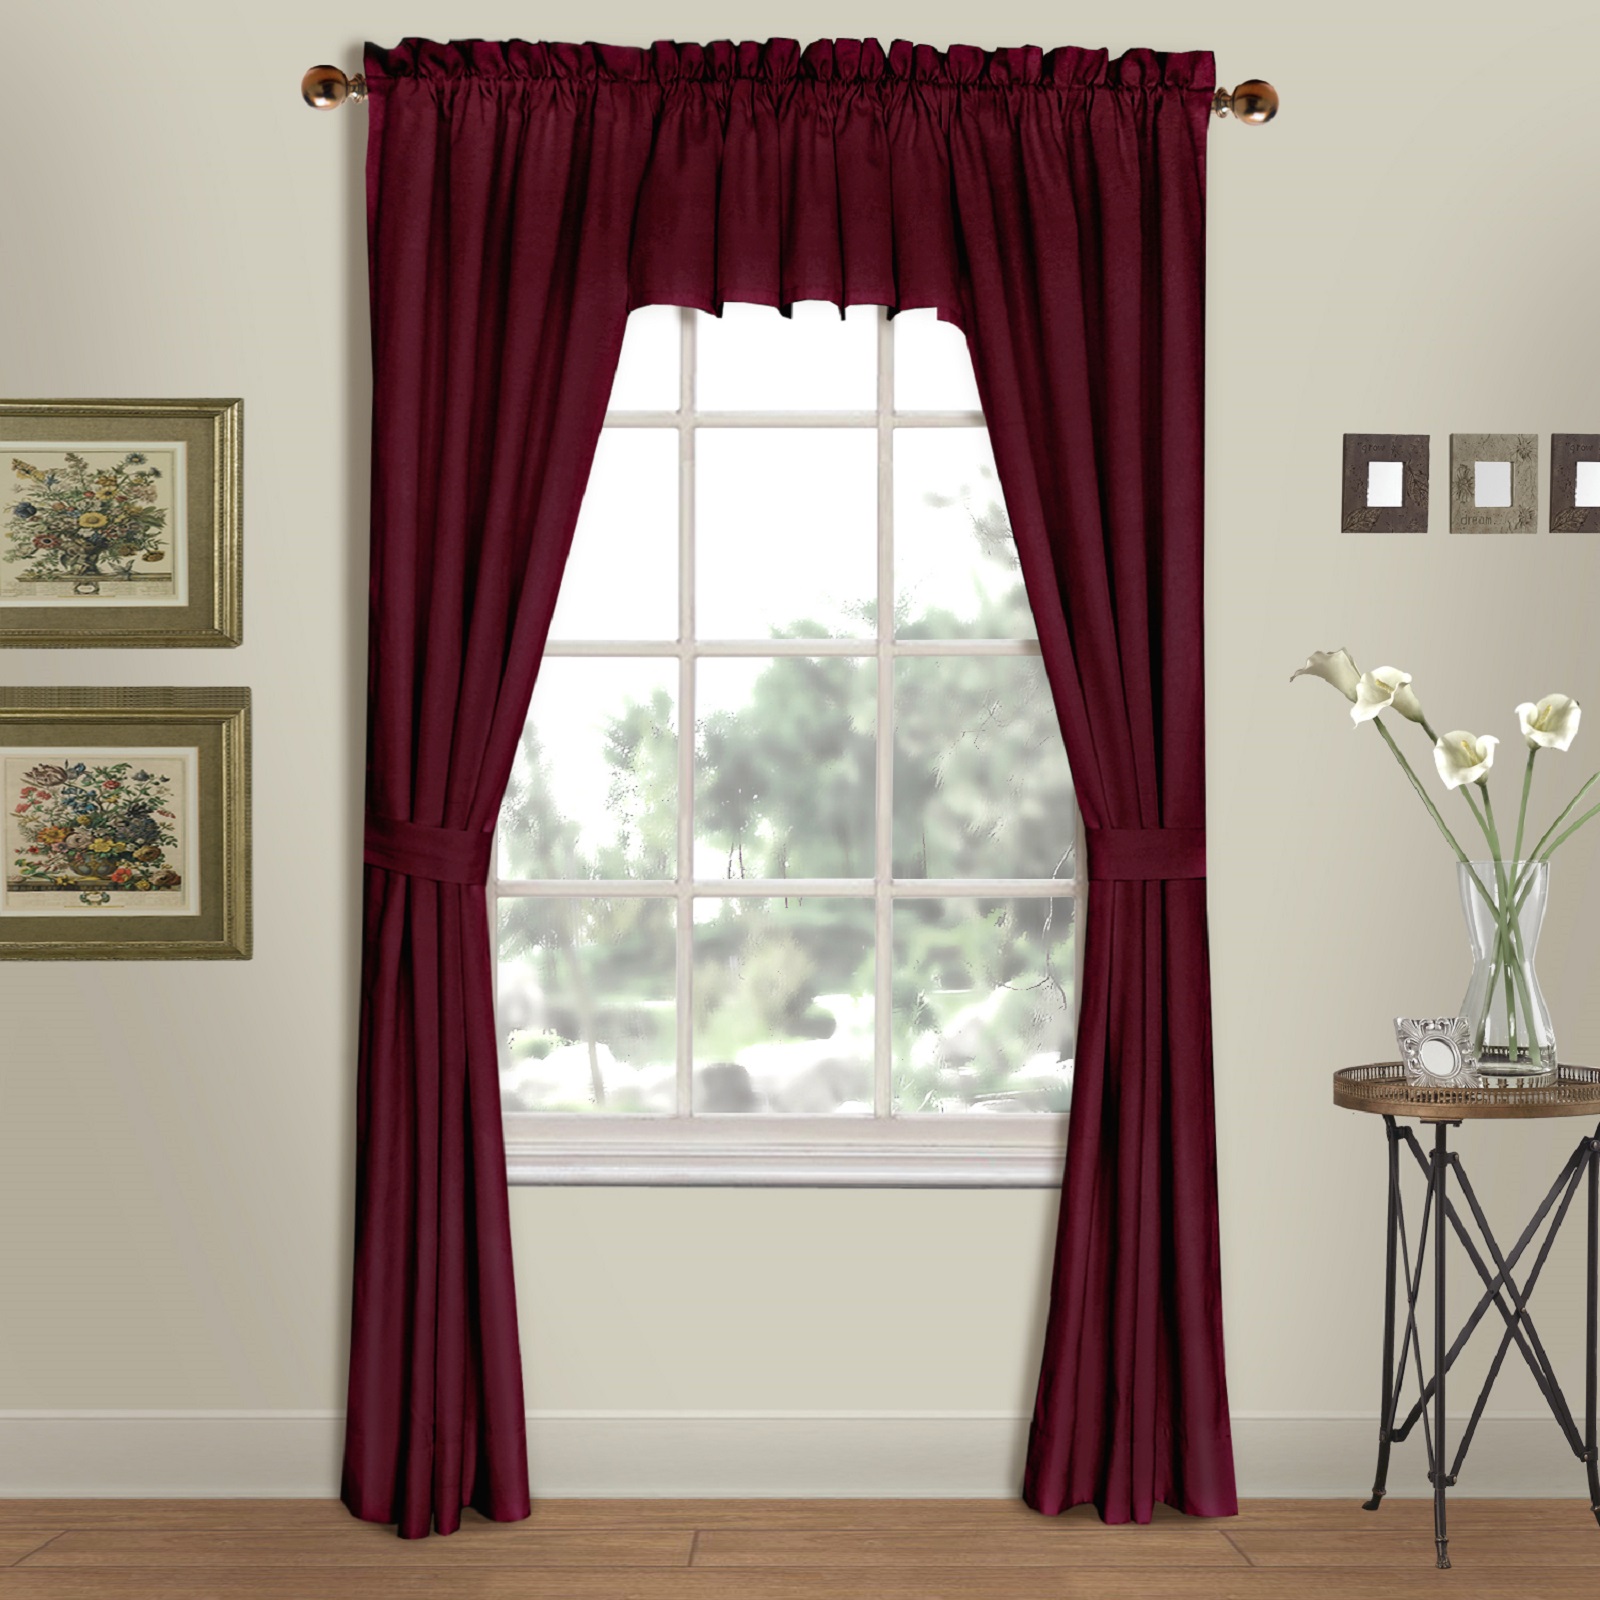 United Curtain Company Westwood 54" x 84" panel available in black, navy, burgundy and natural